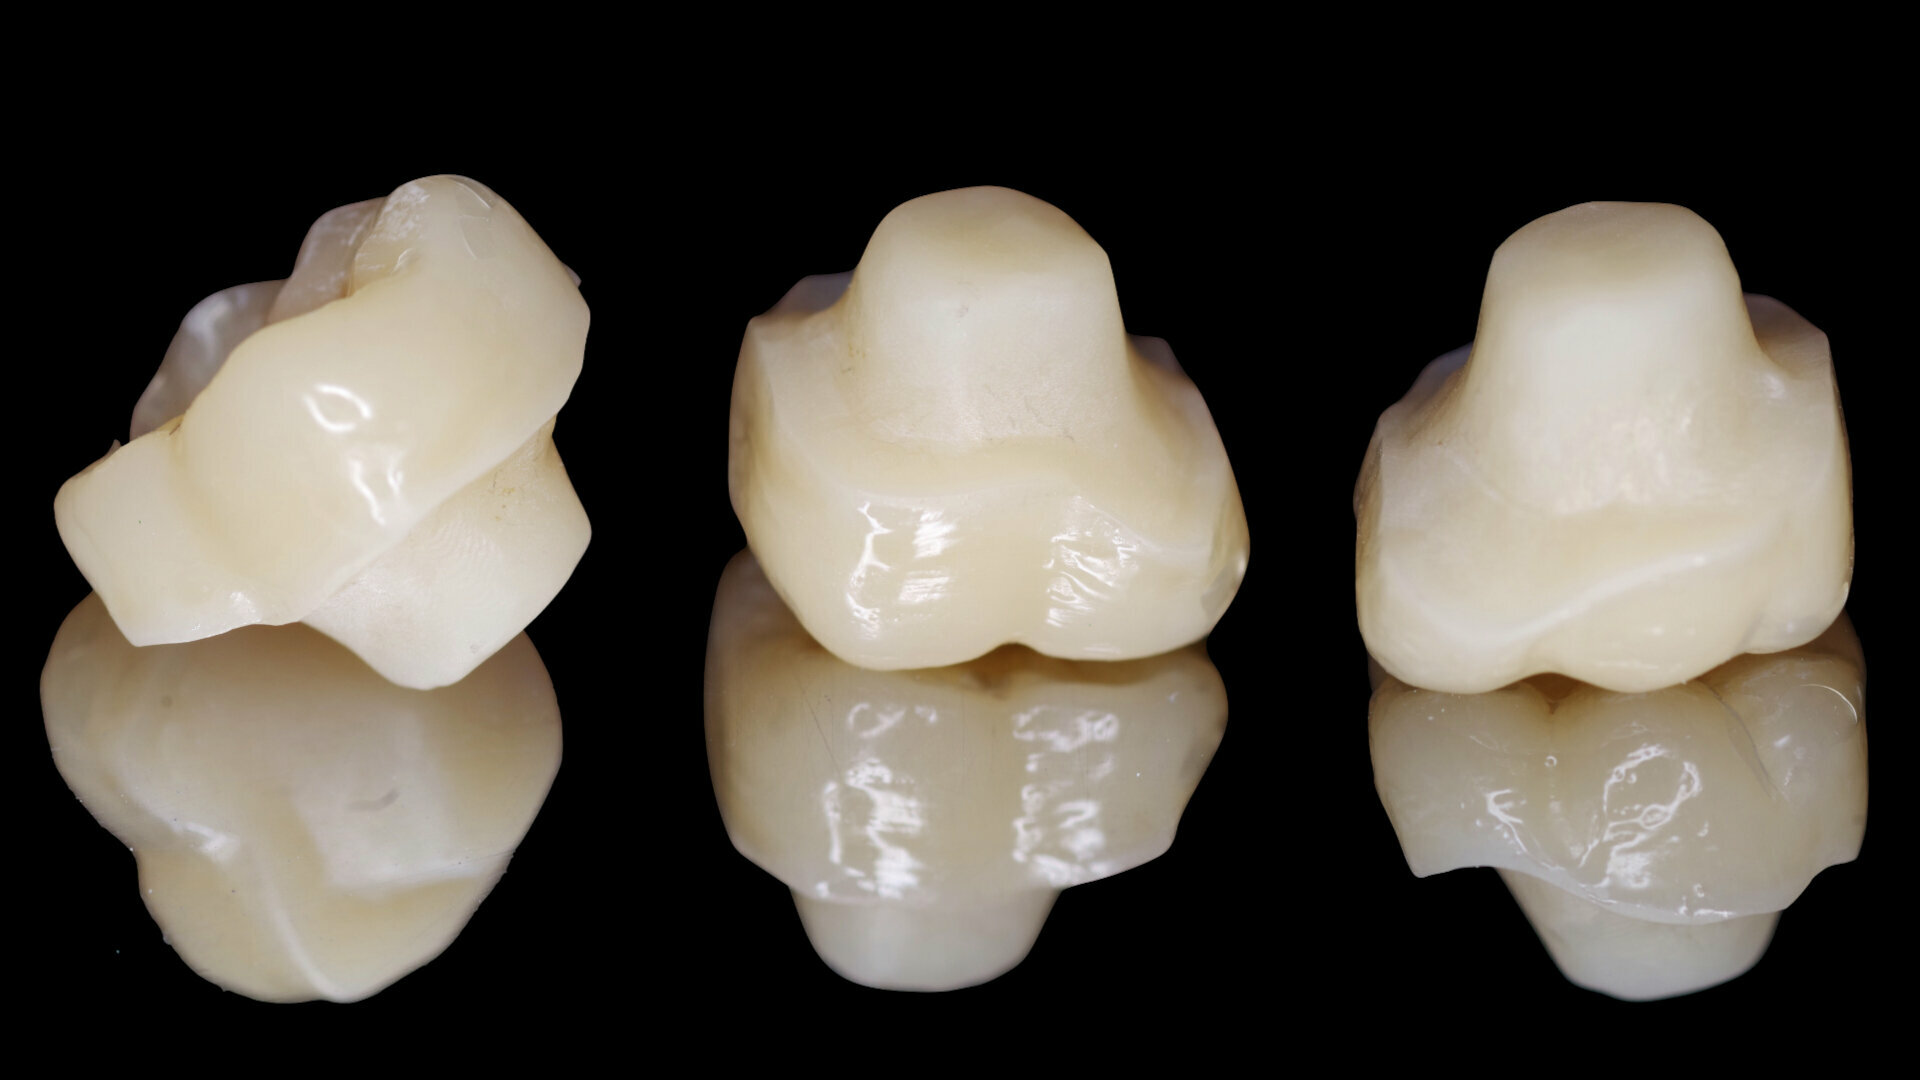 Chairside fabrication of a nano-ceramic hybrid composite endocrown for a severely damaged molar after endodontic treatment